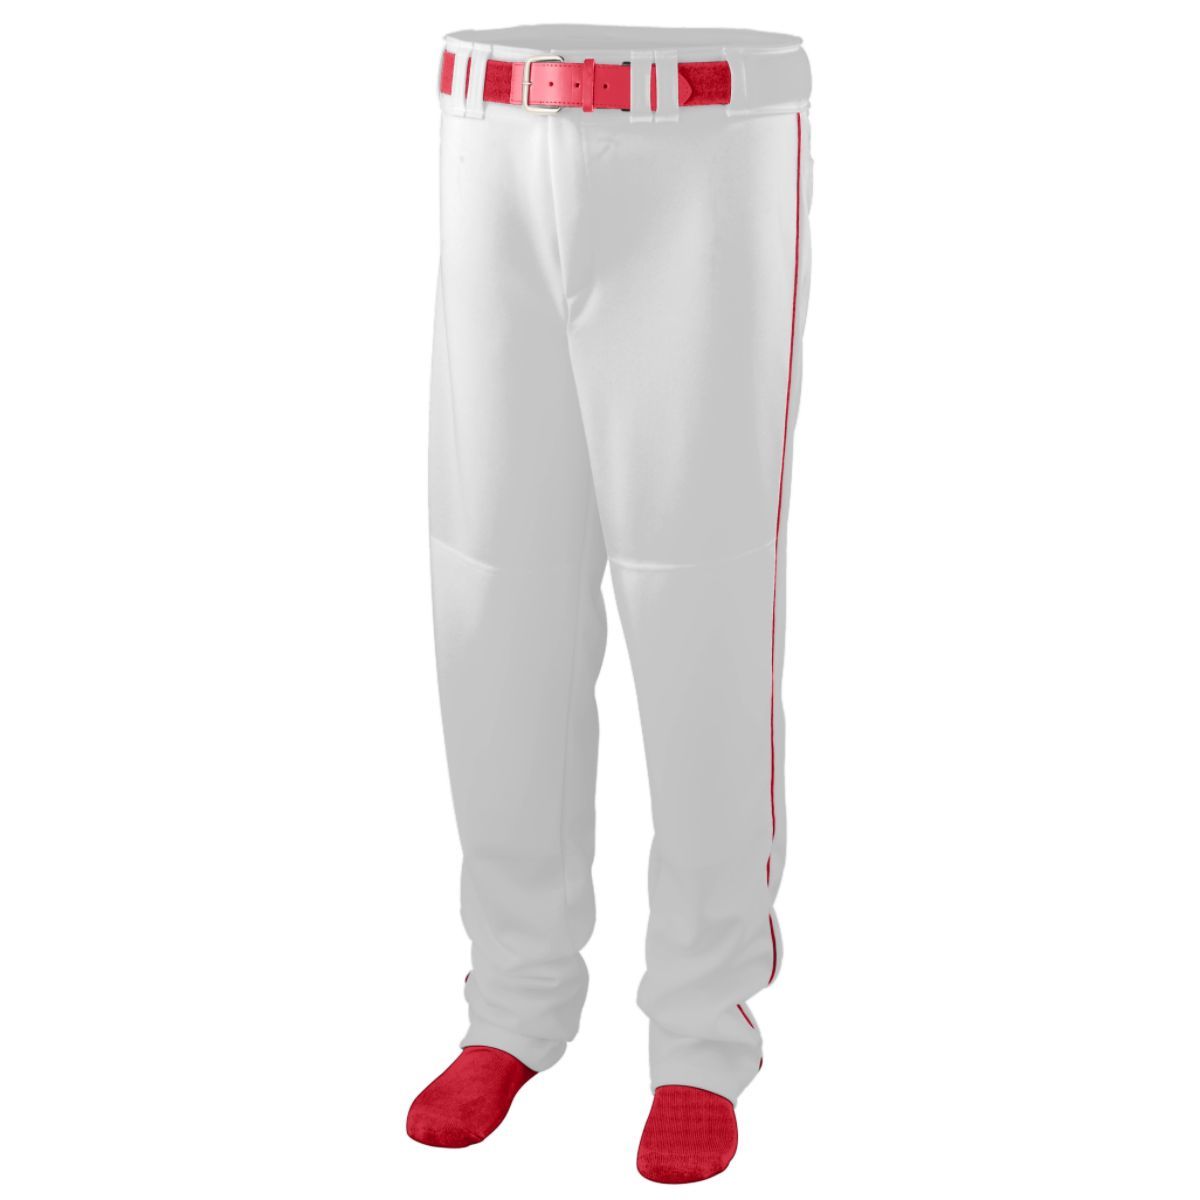 Augusta Sportswear Series Baseball/Softball Pant With Piping in White/Red  -Part of the Adult, Adult-Pants, Pants, Augusta-Products, Baseball, All-Sports, All-Sports-1 product lines at KanaleyCreations.com